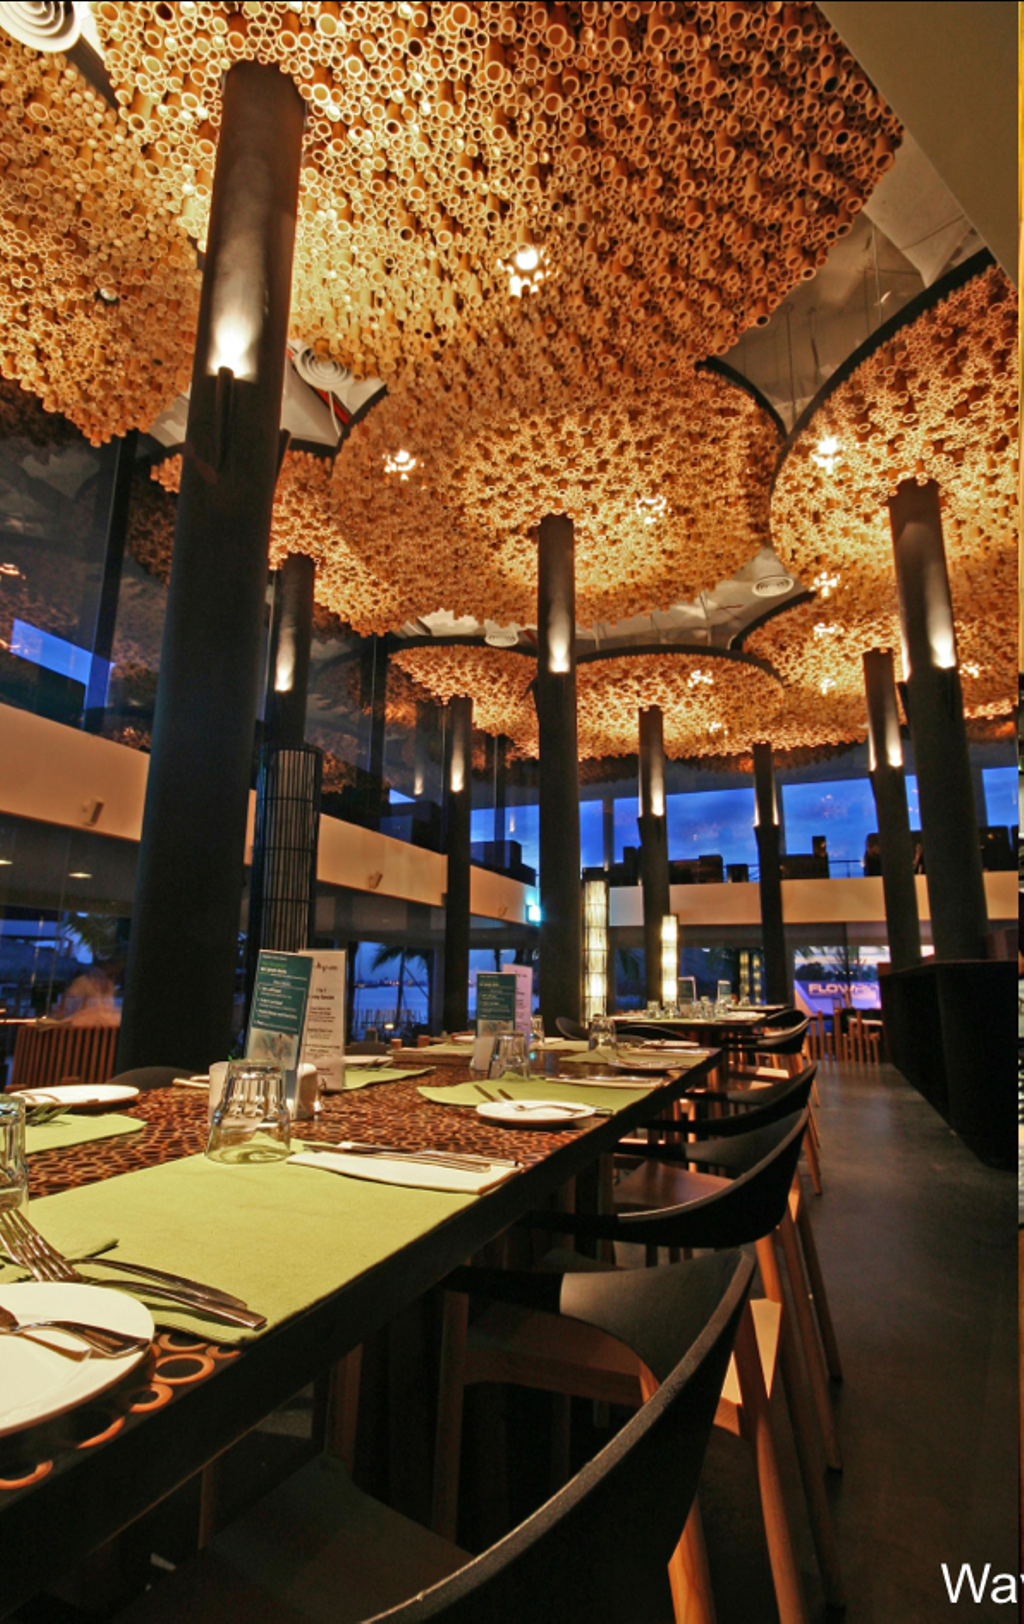 Wavehouse Sentosa, Commercial, Architect, EZRA Architects, Contemporary, False Ceiling, High Ceiling, Wooden Flooring, Wooden Chair, Restaurant